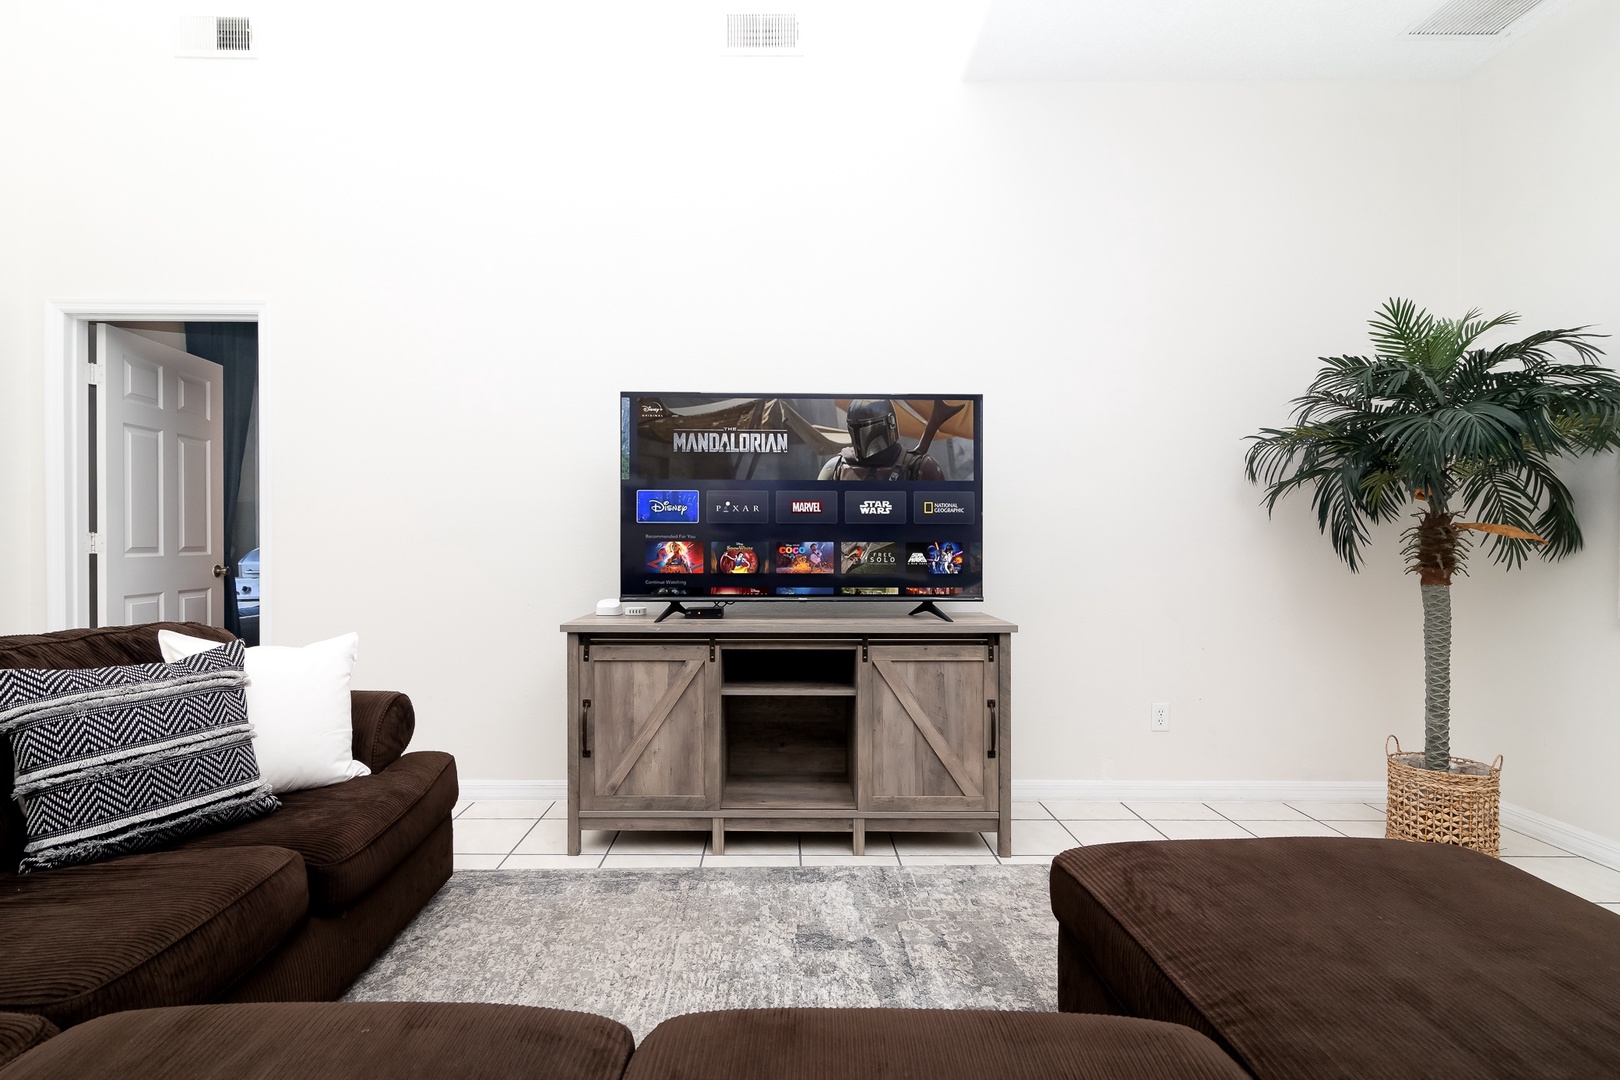 Cable network accessibility in the living room for movie night